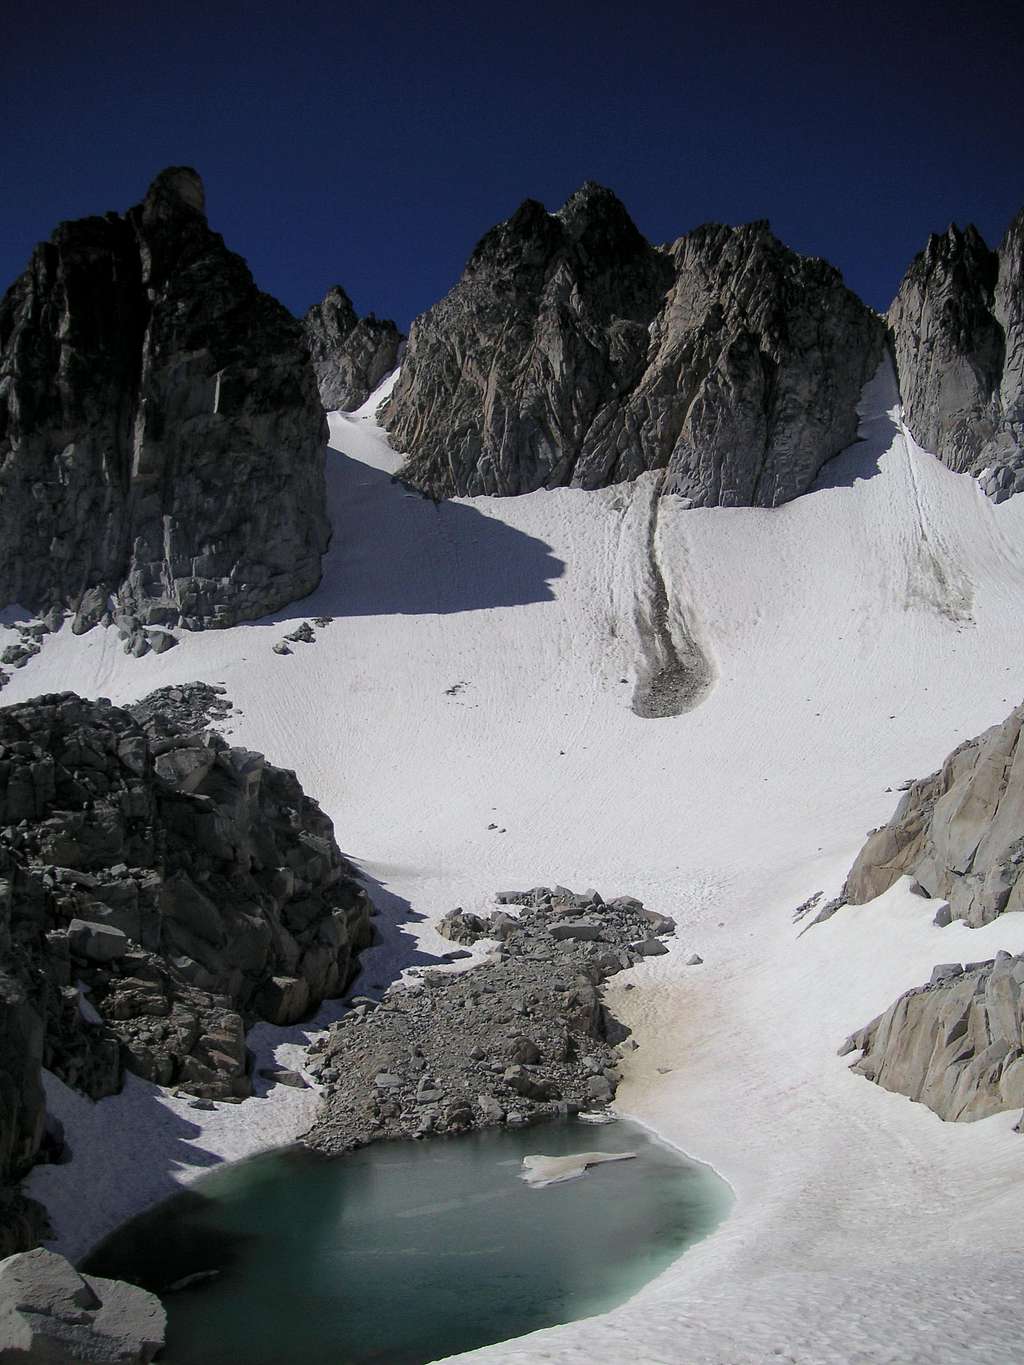 East Dragontail Peak (r) and Witches Tower (l) rise above Mist Pond at Aasgard Pass